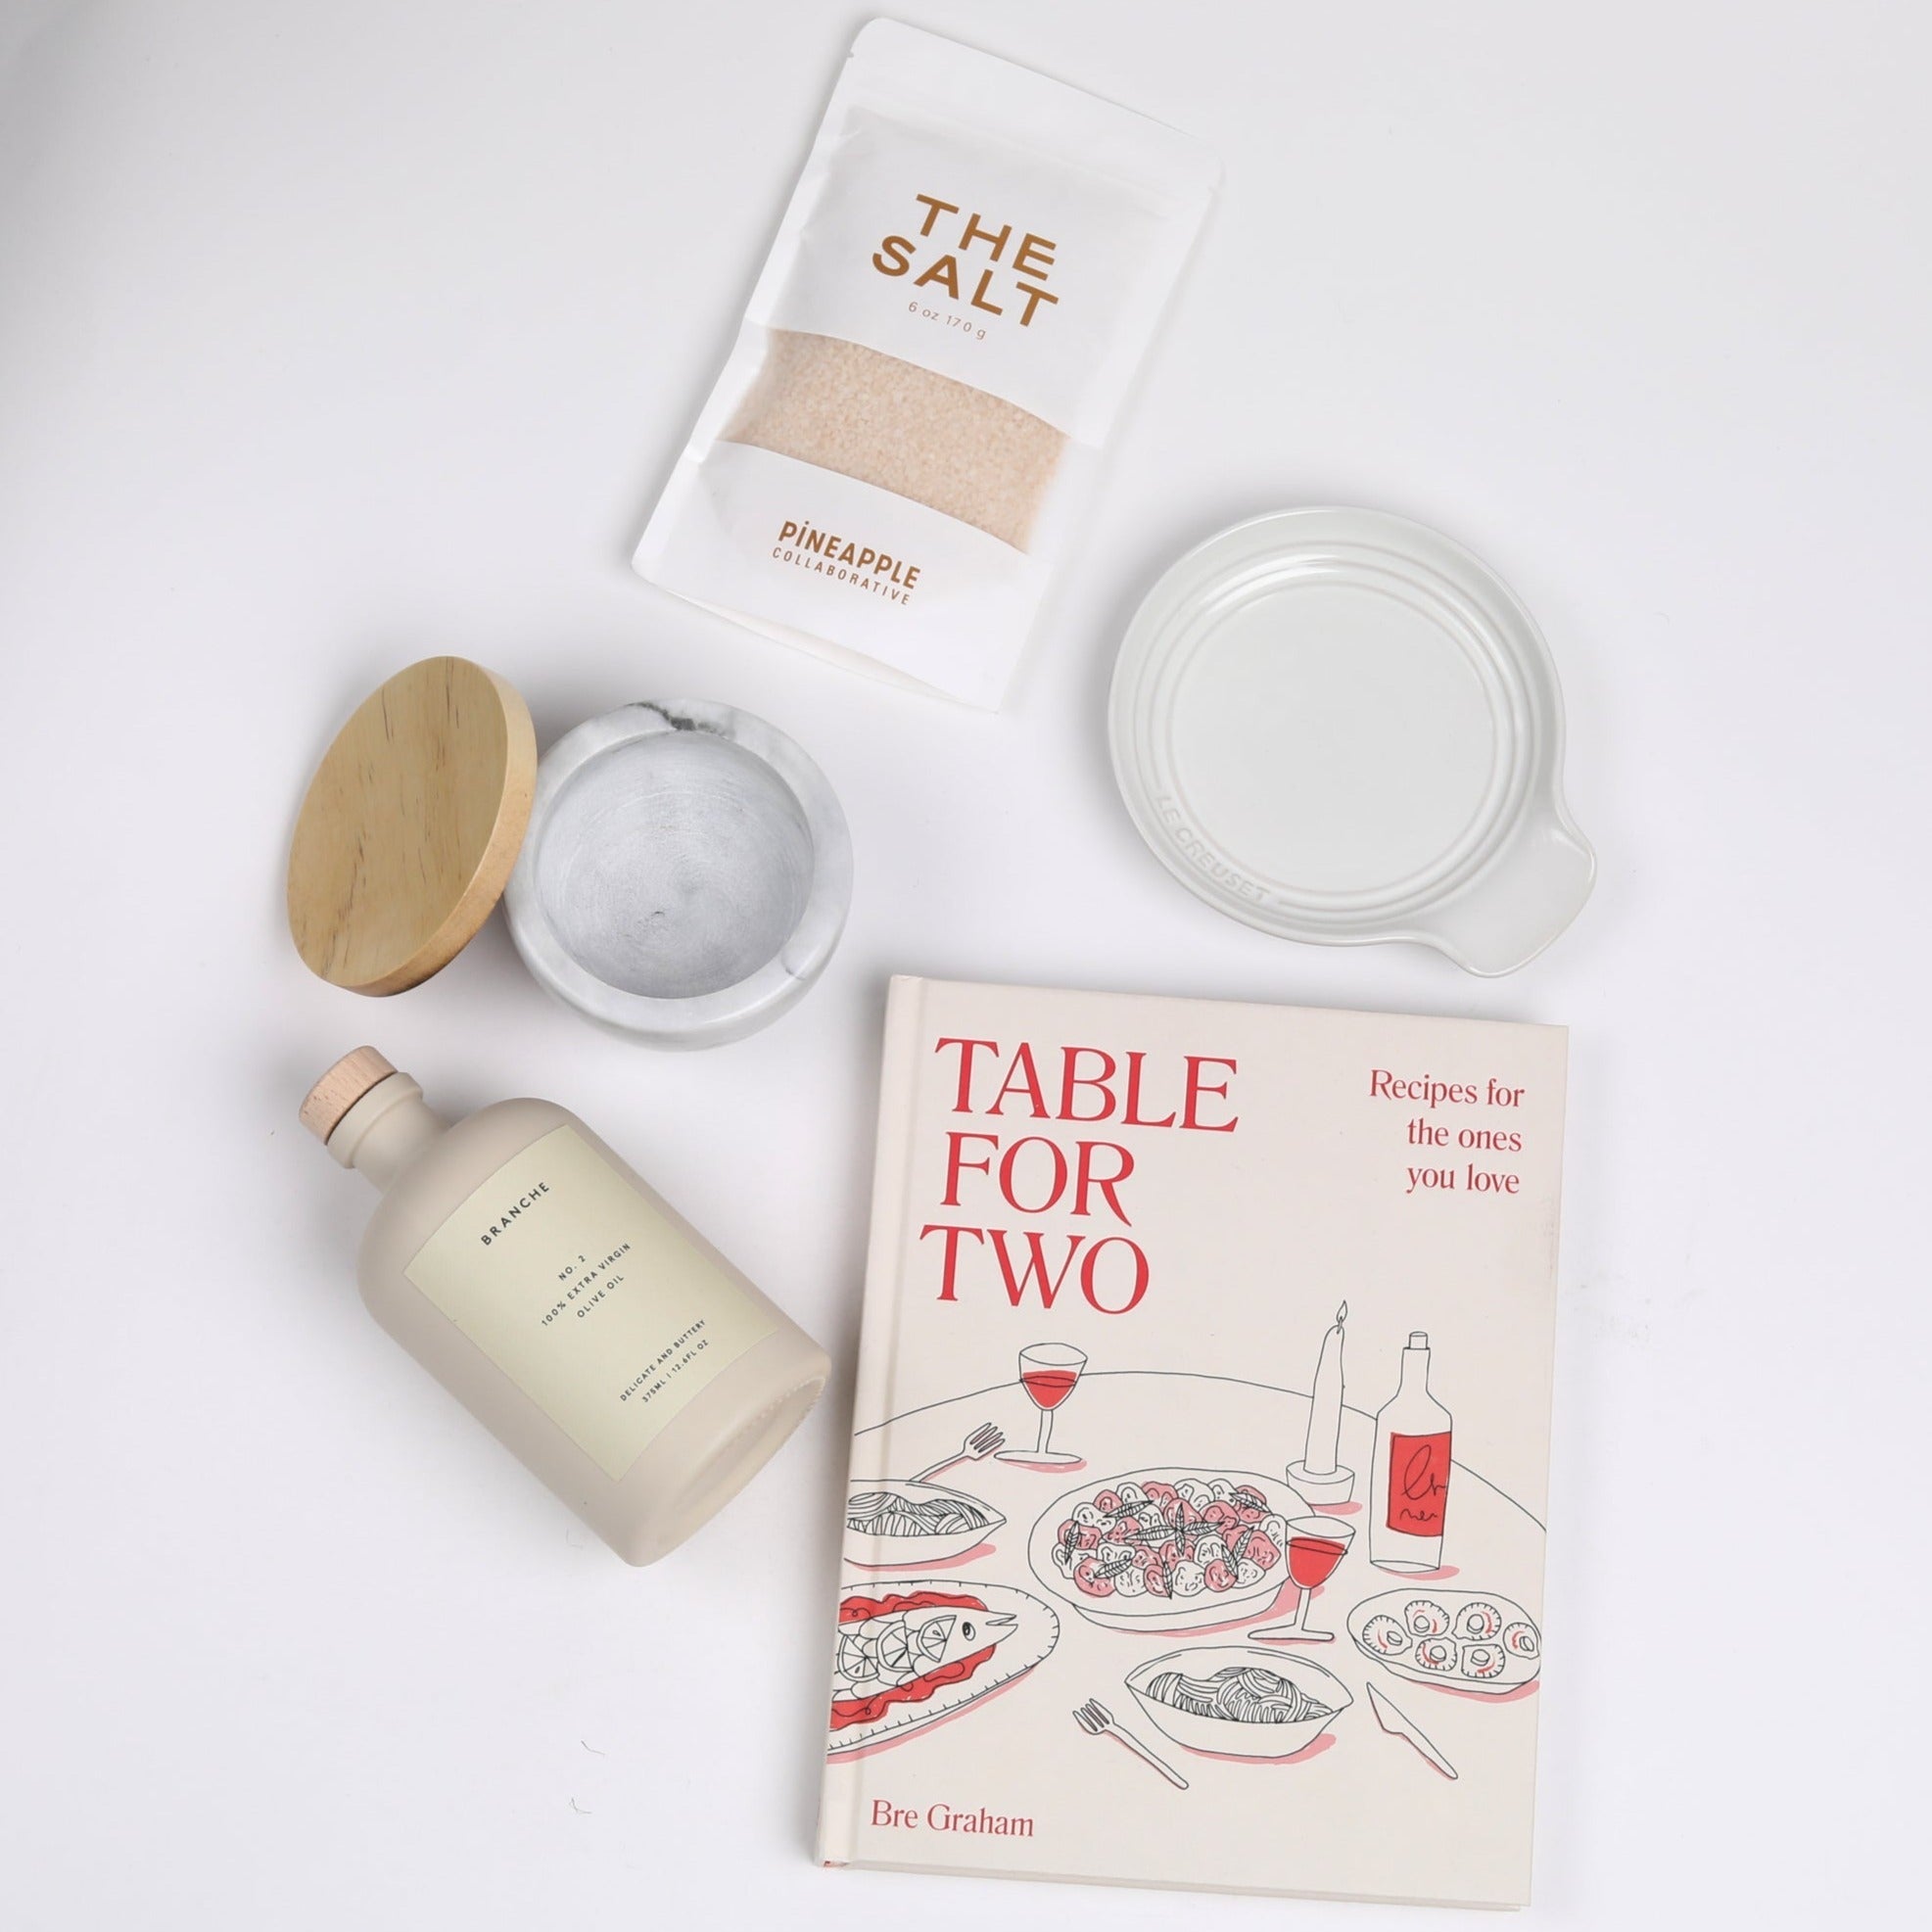 Table for Two ready to ship products including &quot;Table for Two&quot; cookbook, Le Creuset spoon rest, Branche olive oil, The Salt, and marble salt cellar